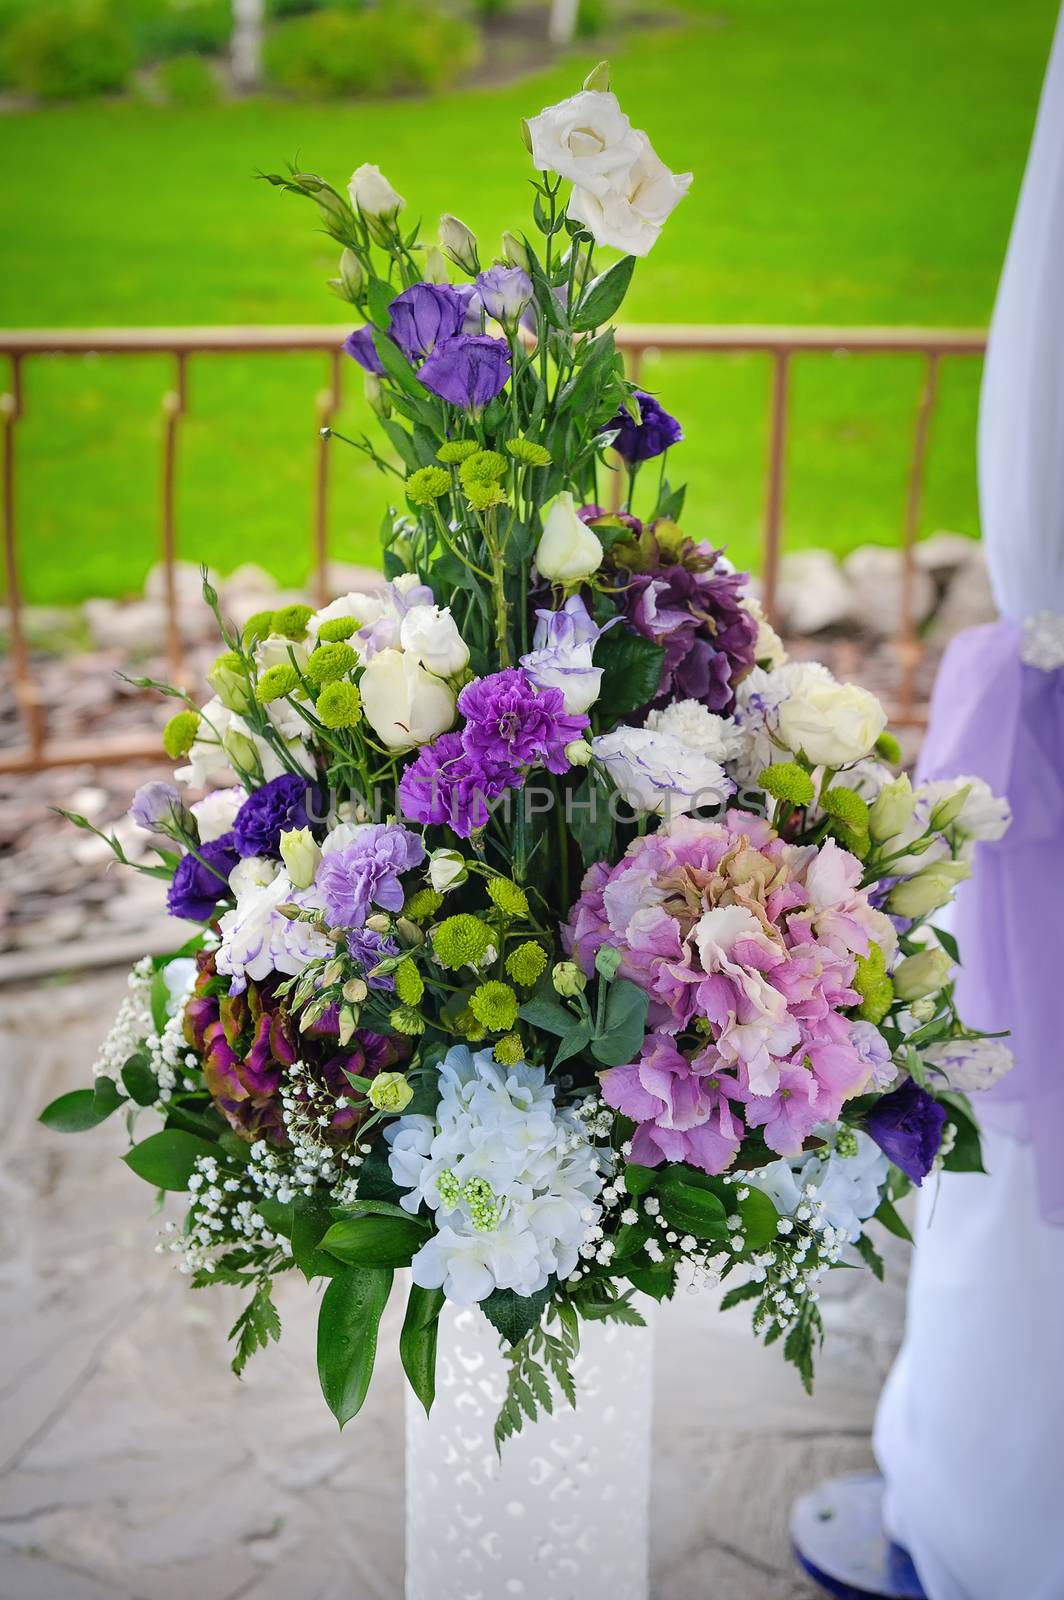 Big Flowers Bouquet blossom. Decorated of wedding